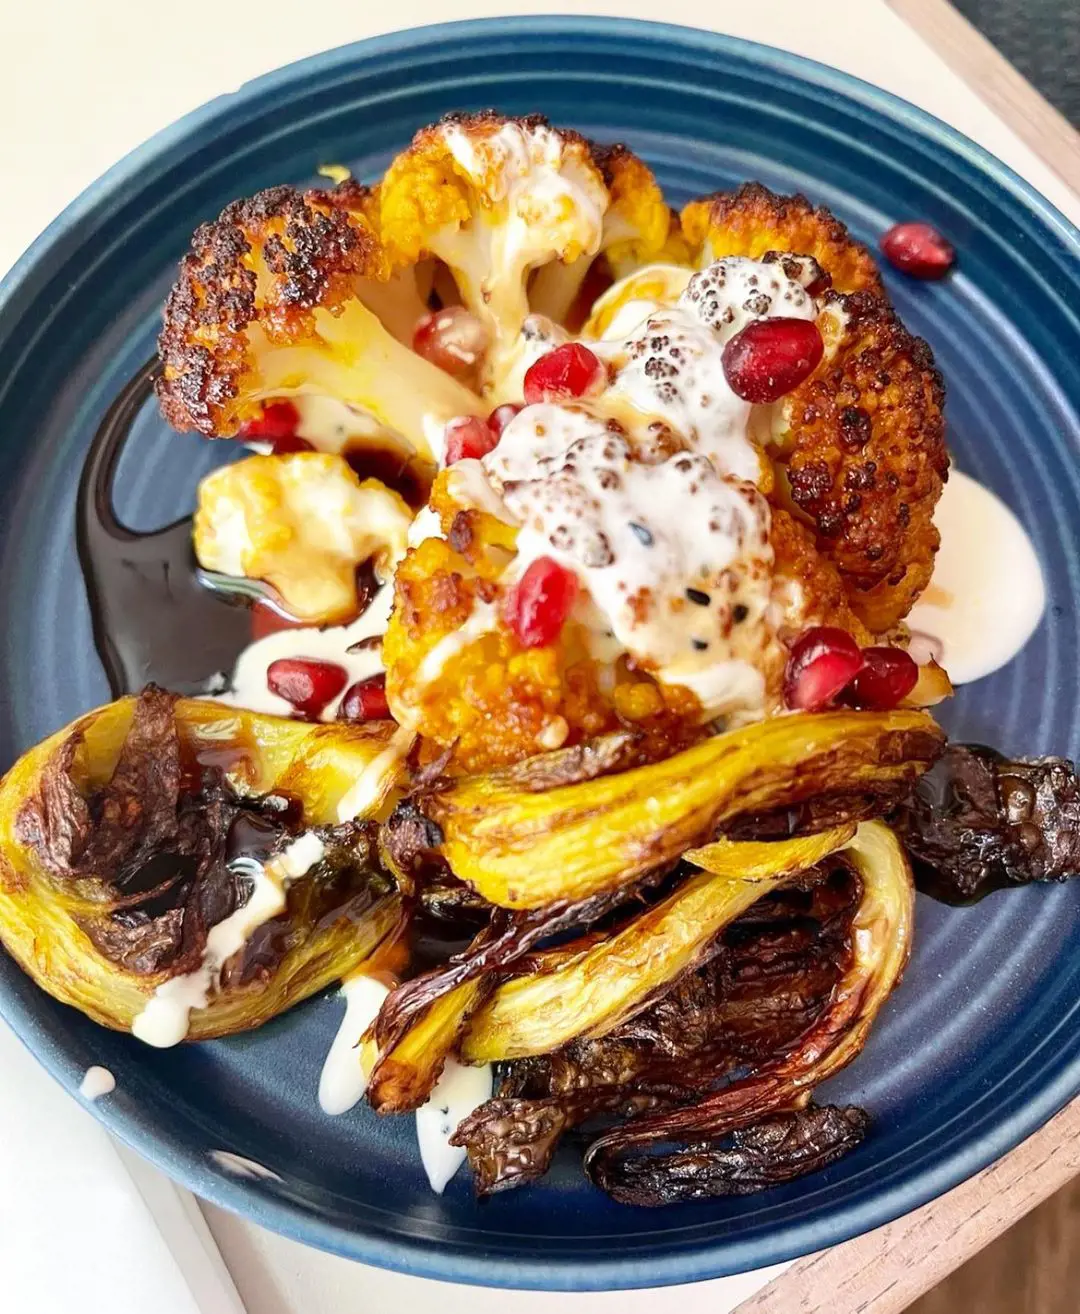 charred cauliflower, with lemon-infused crème fraiche and pomegranate molasses